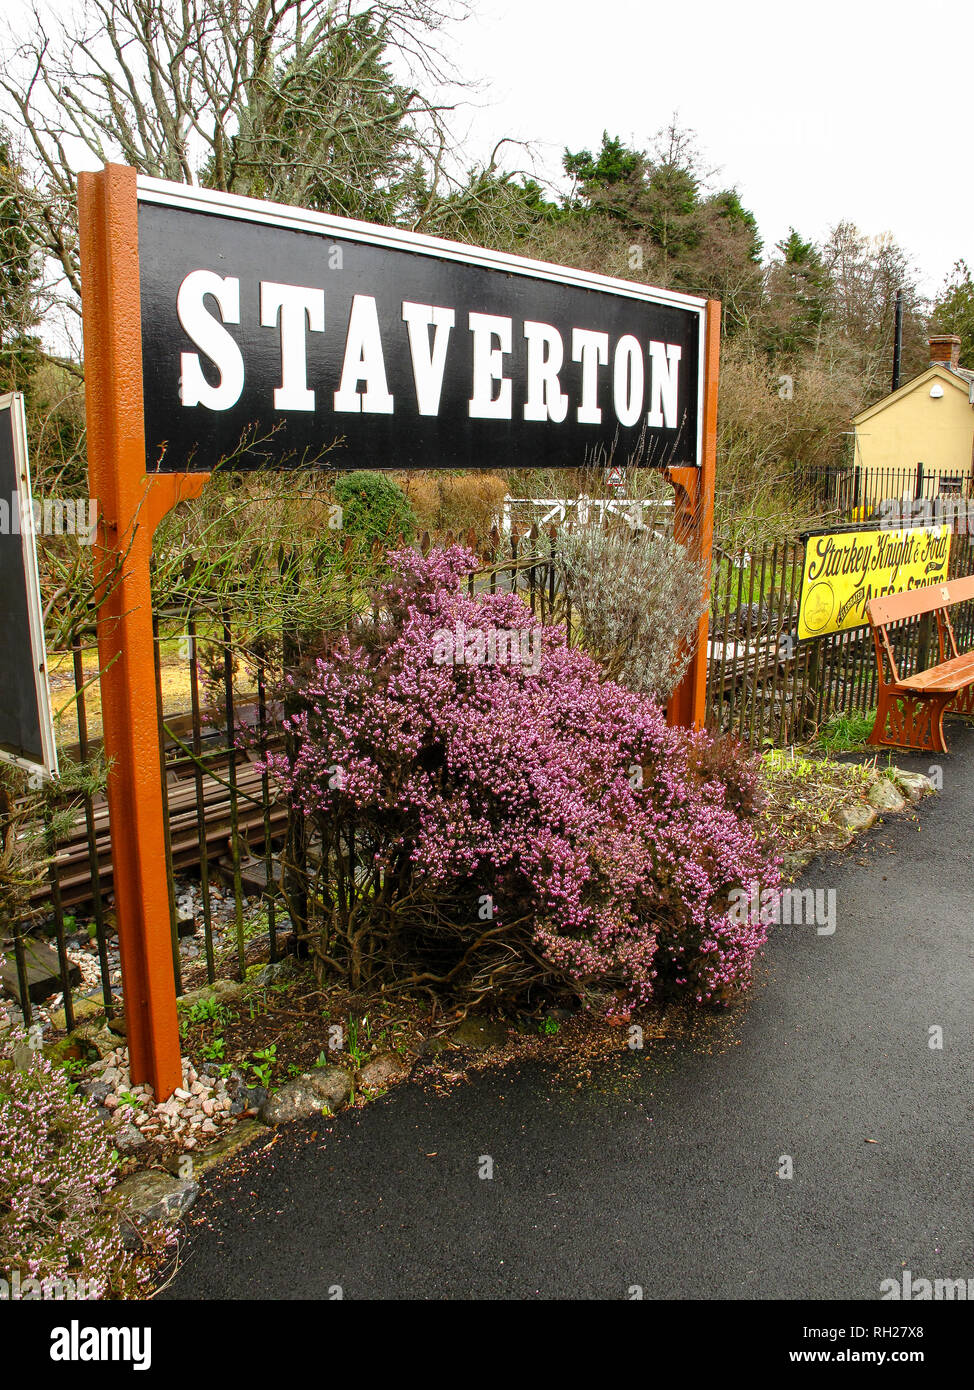 Staverton village railway station sign in Devon, with beautiful pink flowers growing under sign. Stock Photo